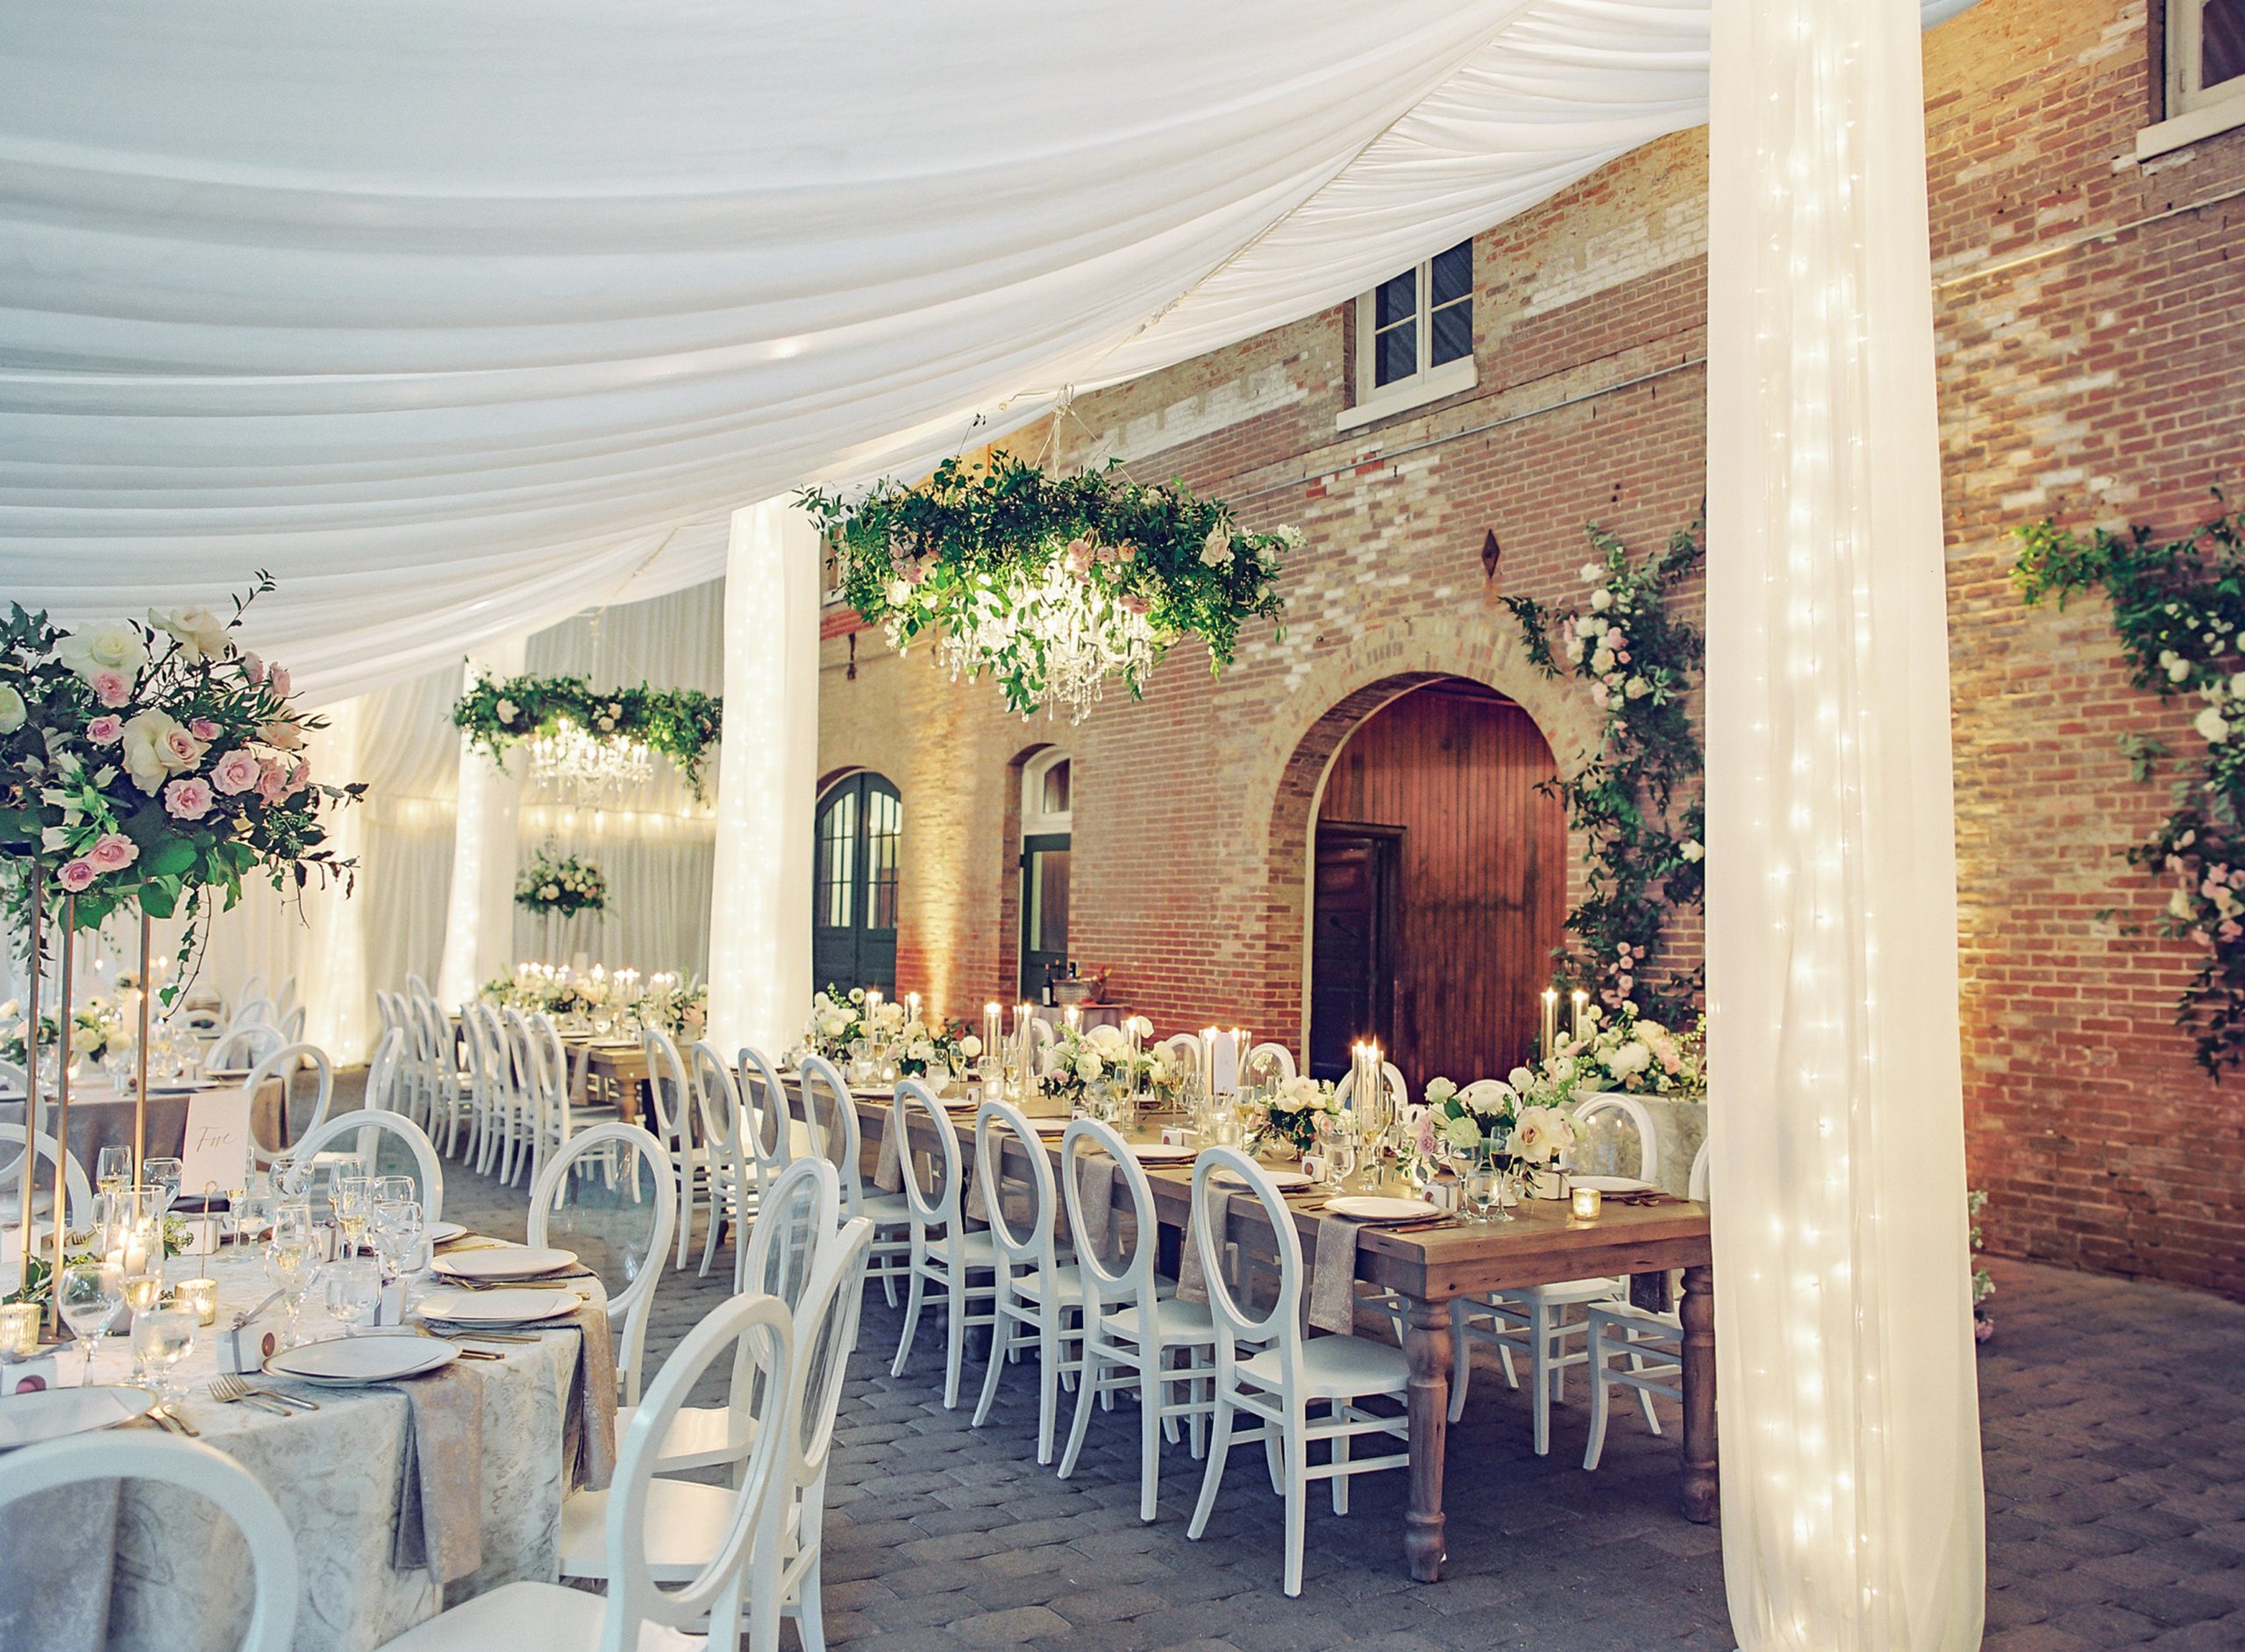 Tented portion of Carriage House decorated for reception